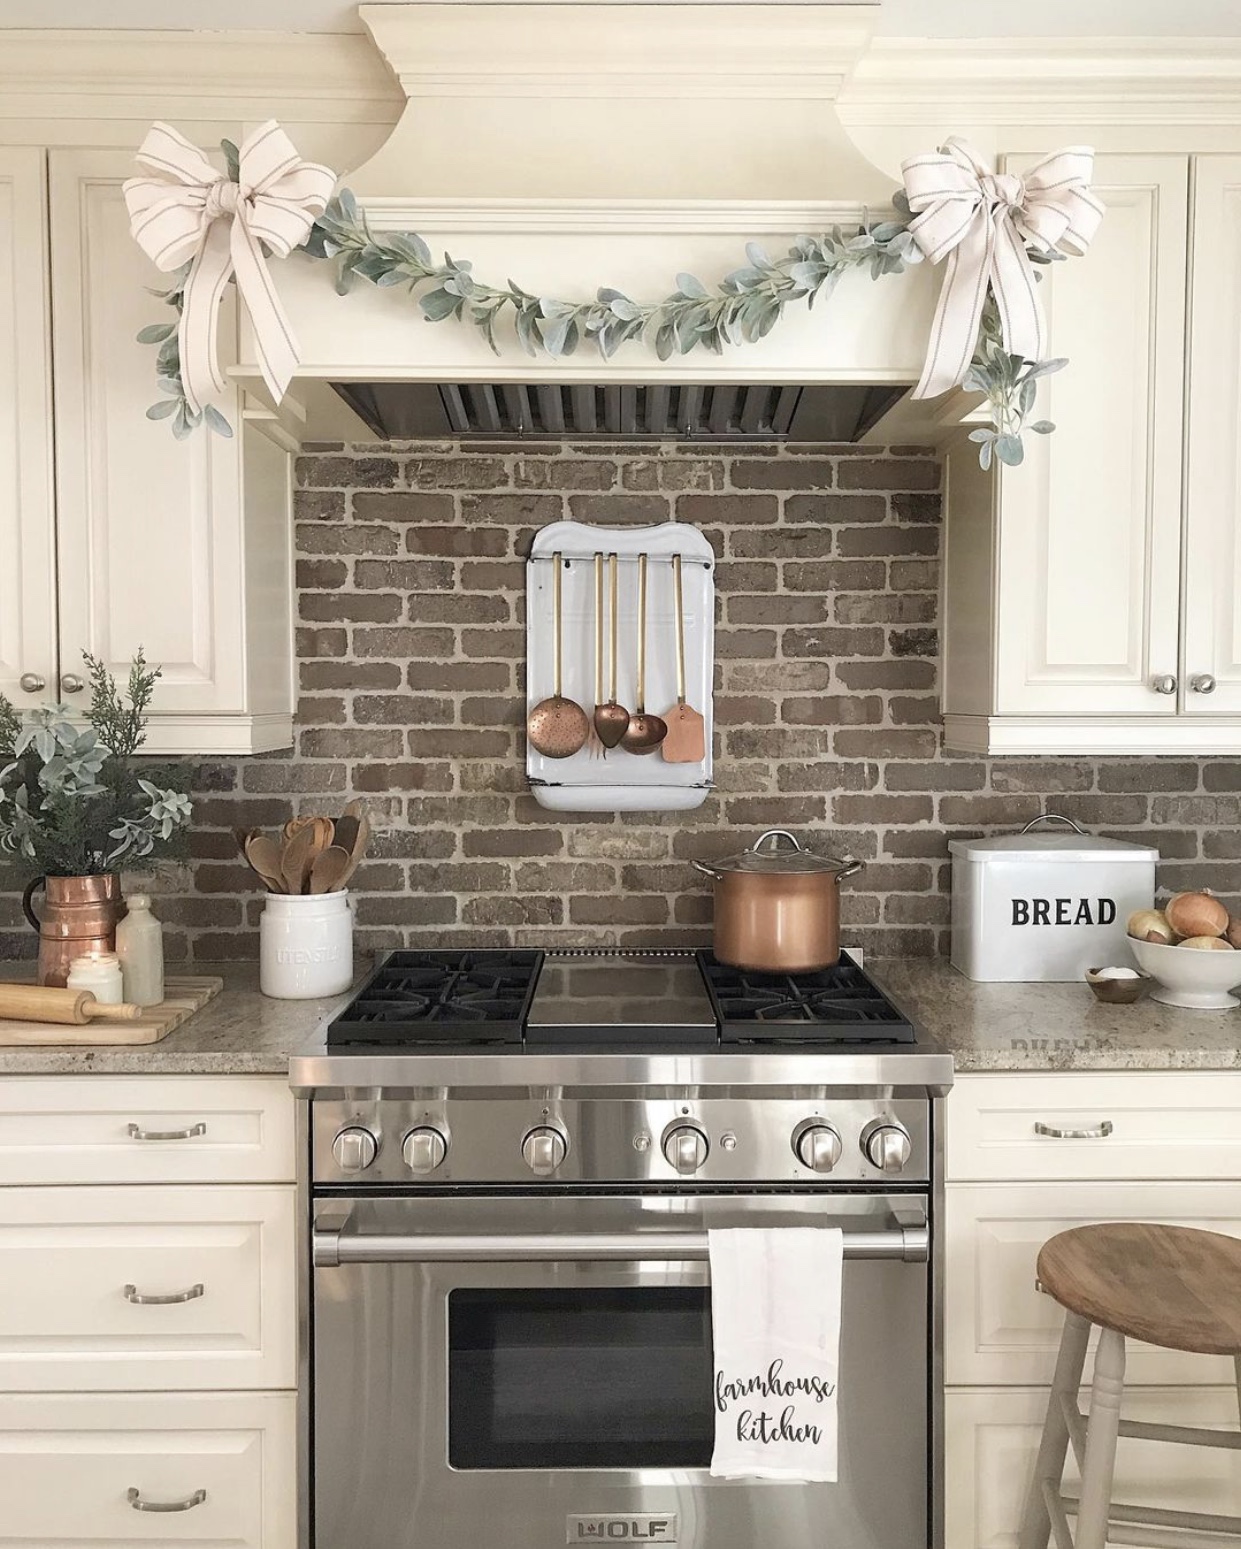 Farmhouse Christmas decor in the kitchen with garland over the stove hood and greenery in a vase.